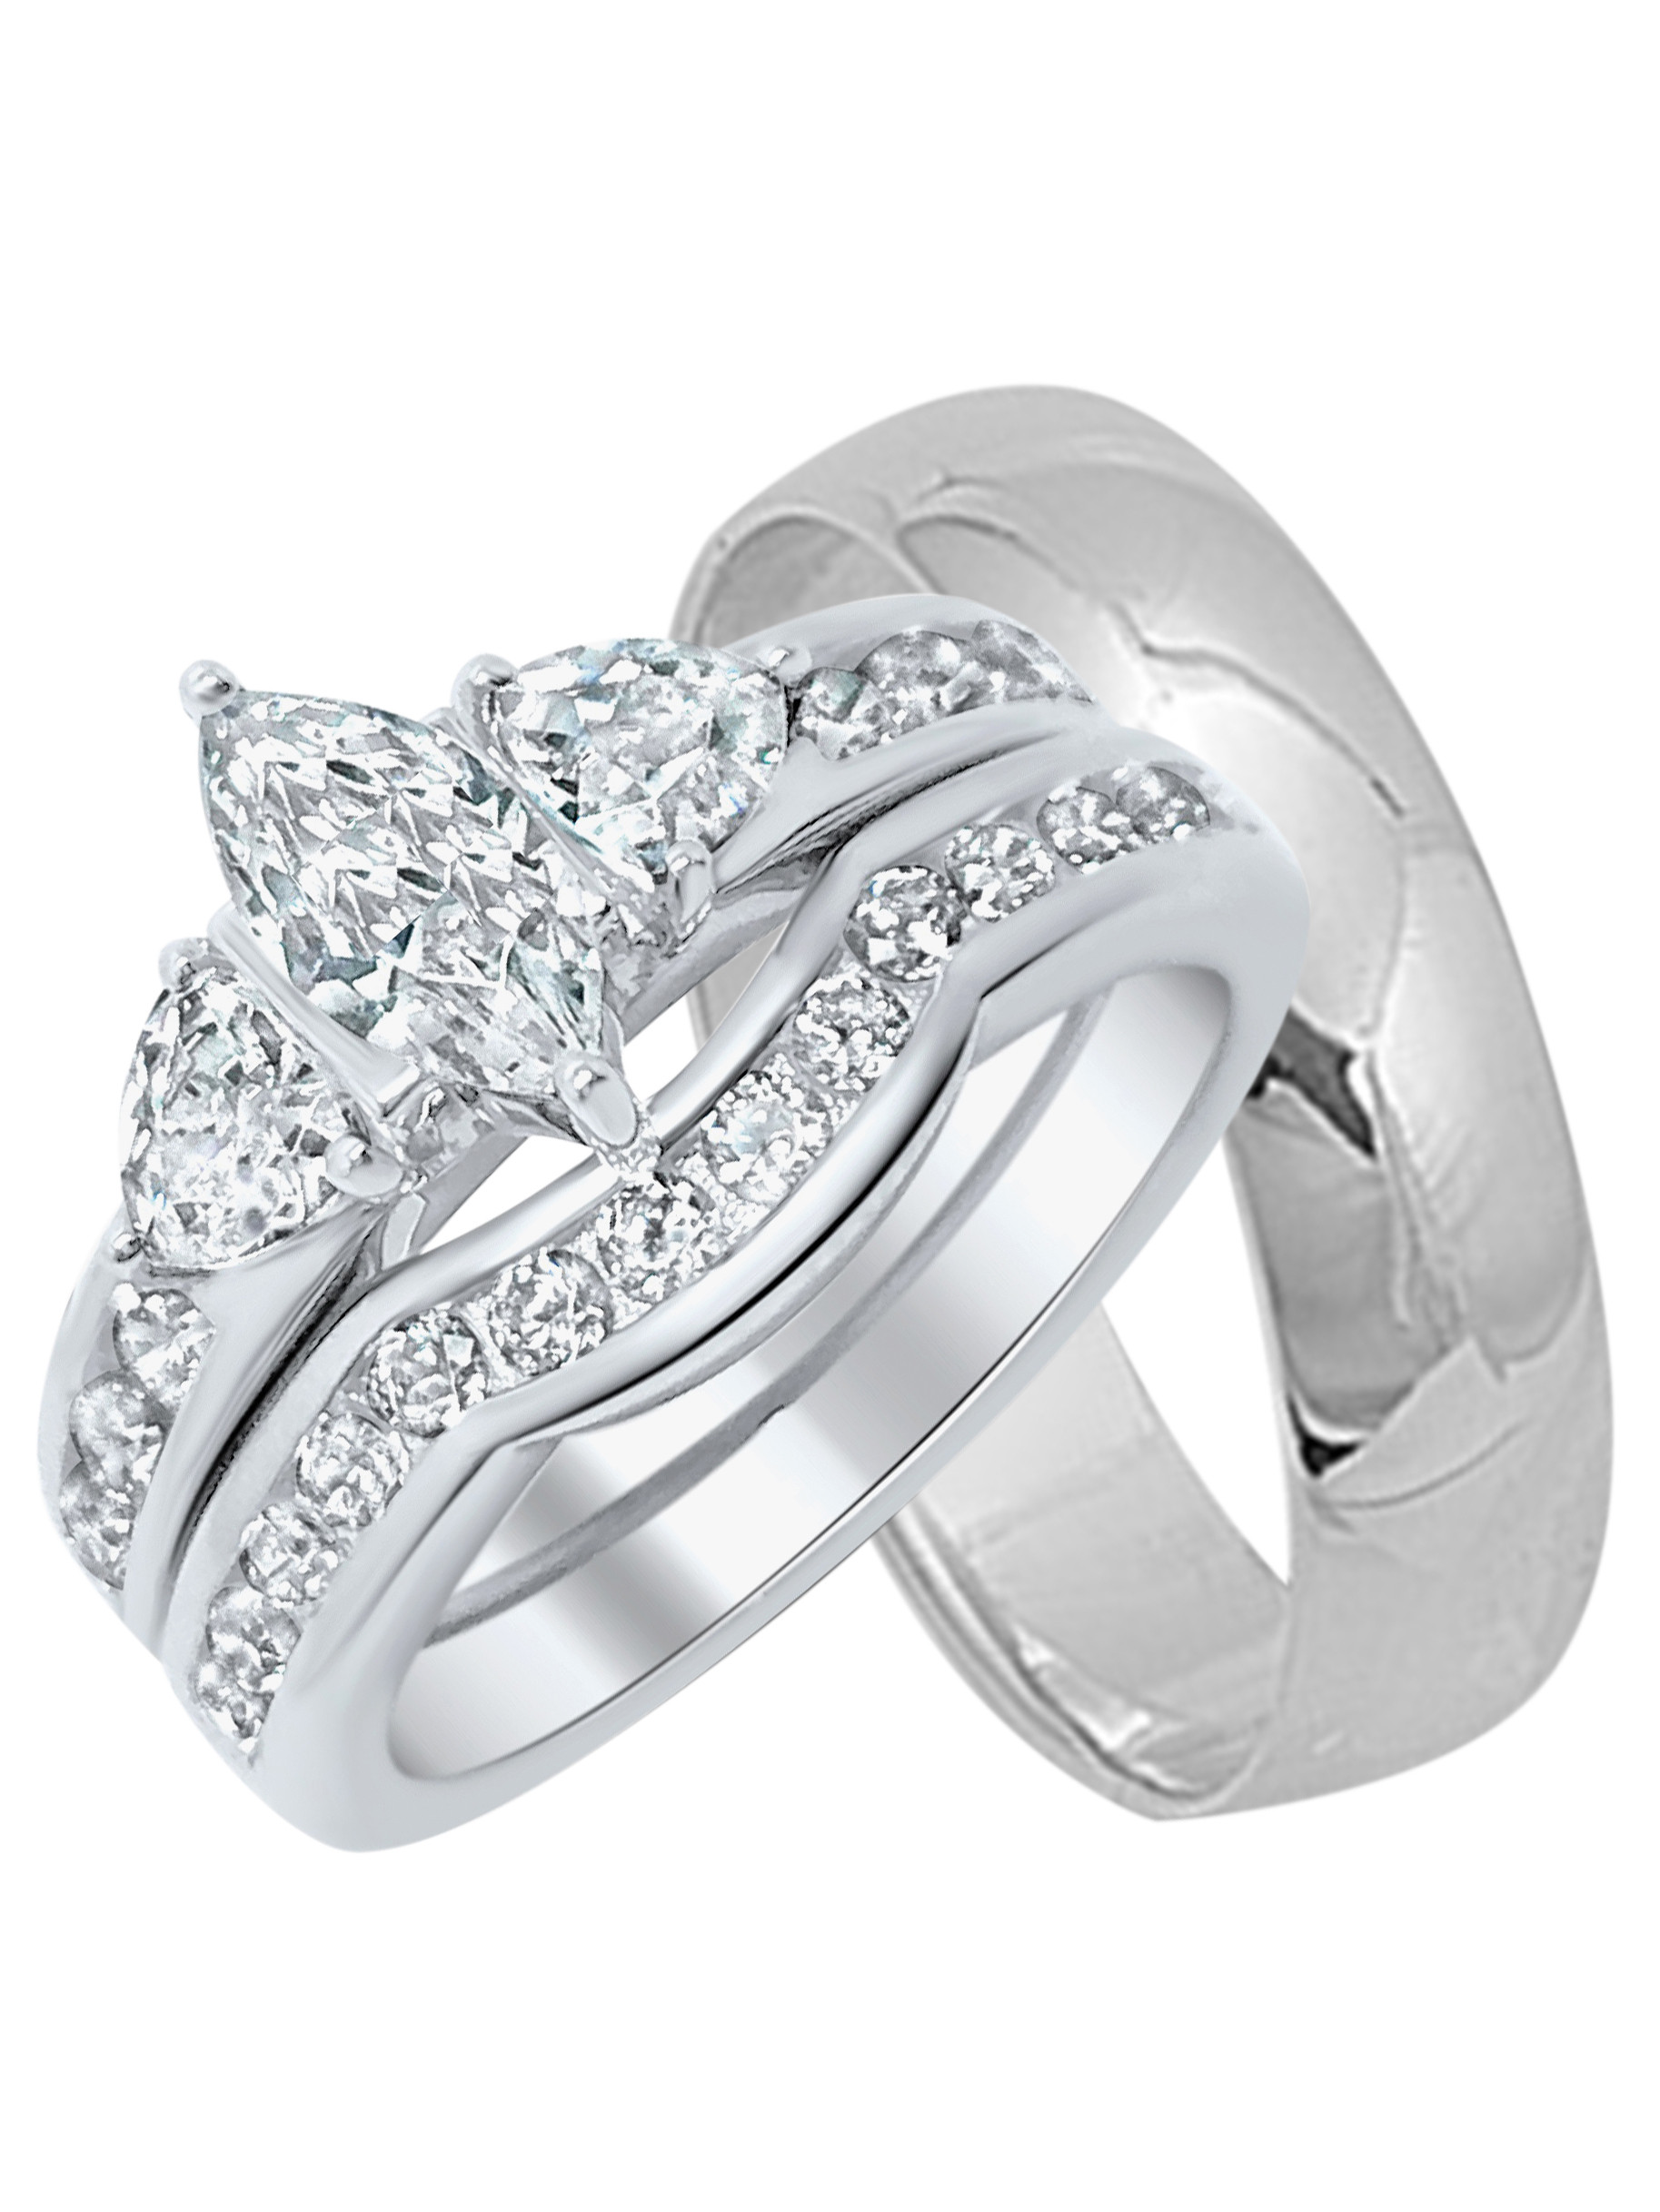 Silver Wedding Ring Sets For Him And Her
 LaRaso & Co His and Her Wedding Rings Set Sterling